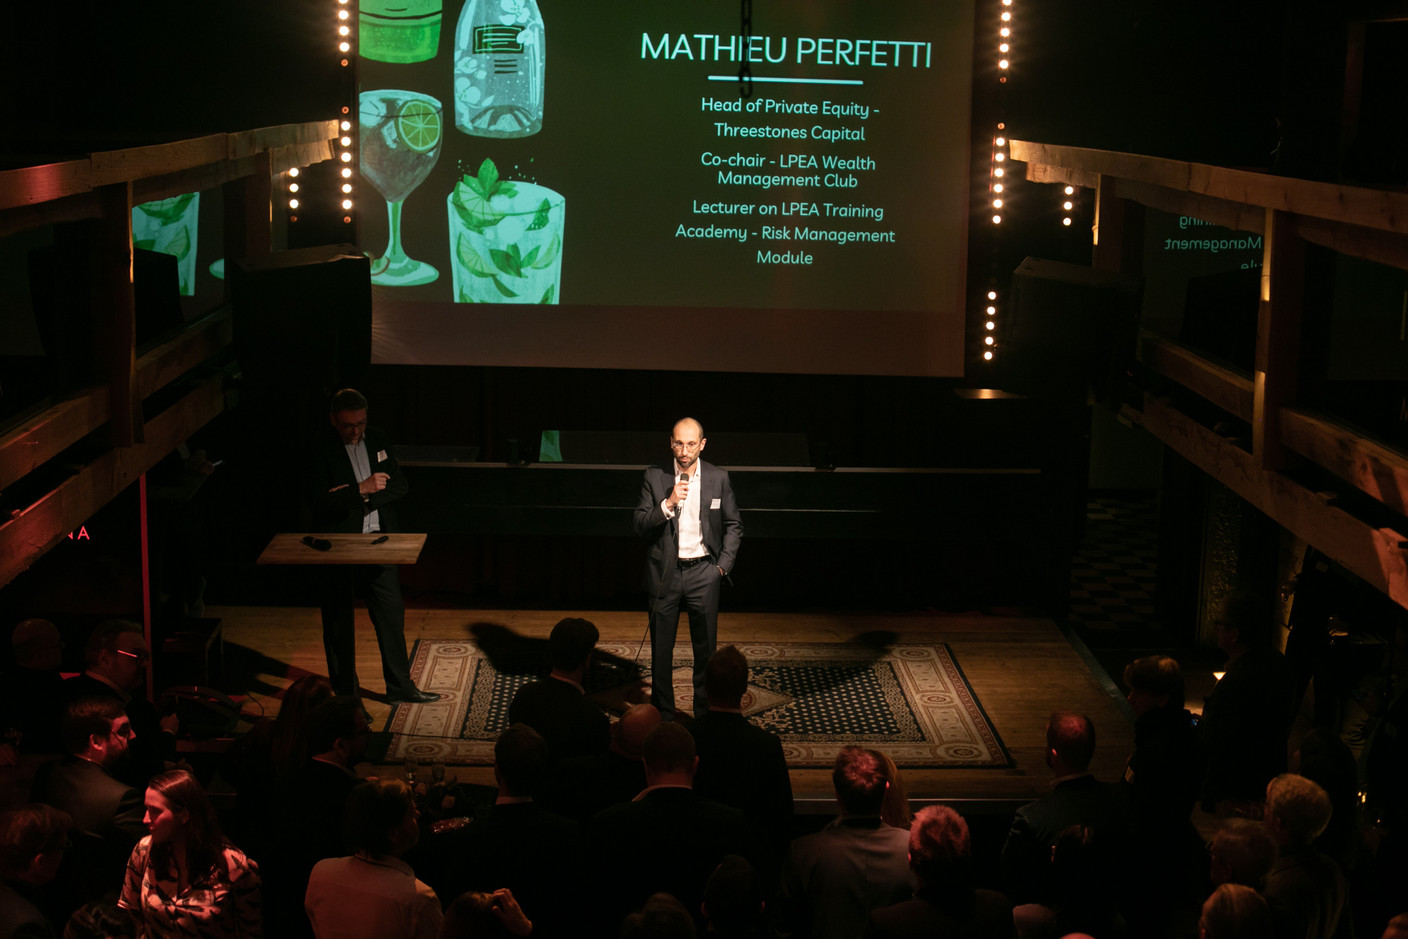 Mathieu Perfetti, head of private equity at Threestones Capital, co-chair of the LPEA wealth management club and LPEA lecturer on risk management, speaking at the LPEA's New Year's reception on 19 January at Melusina. Matic Zorman / Maison Moderne